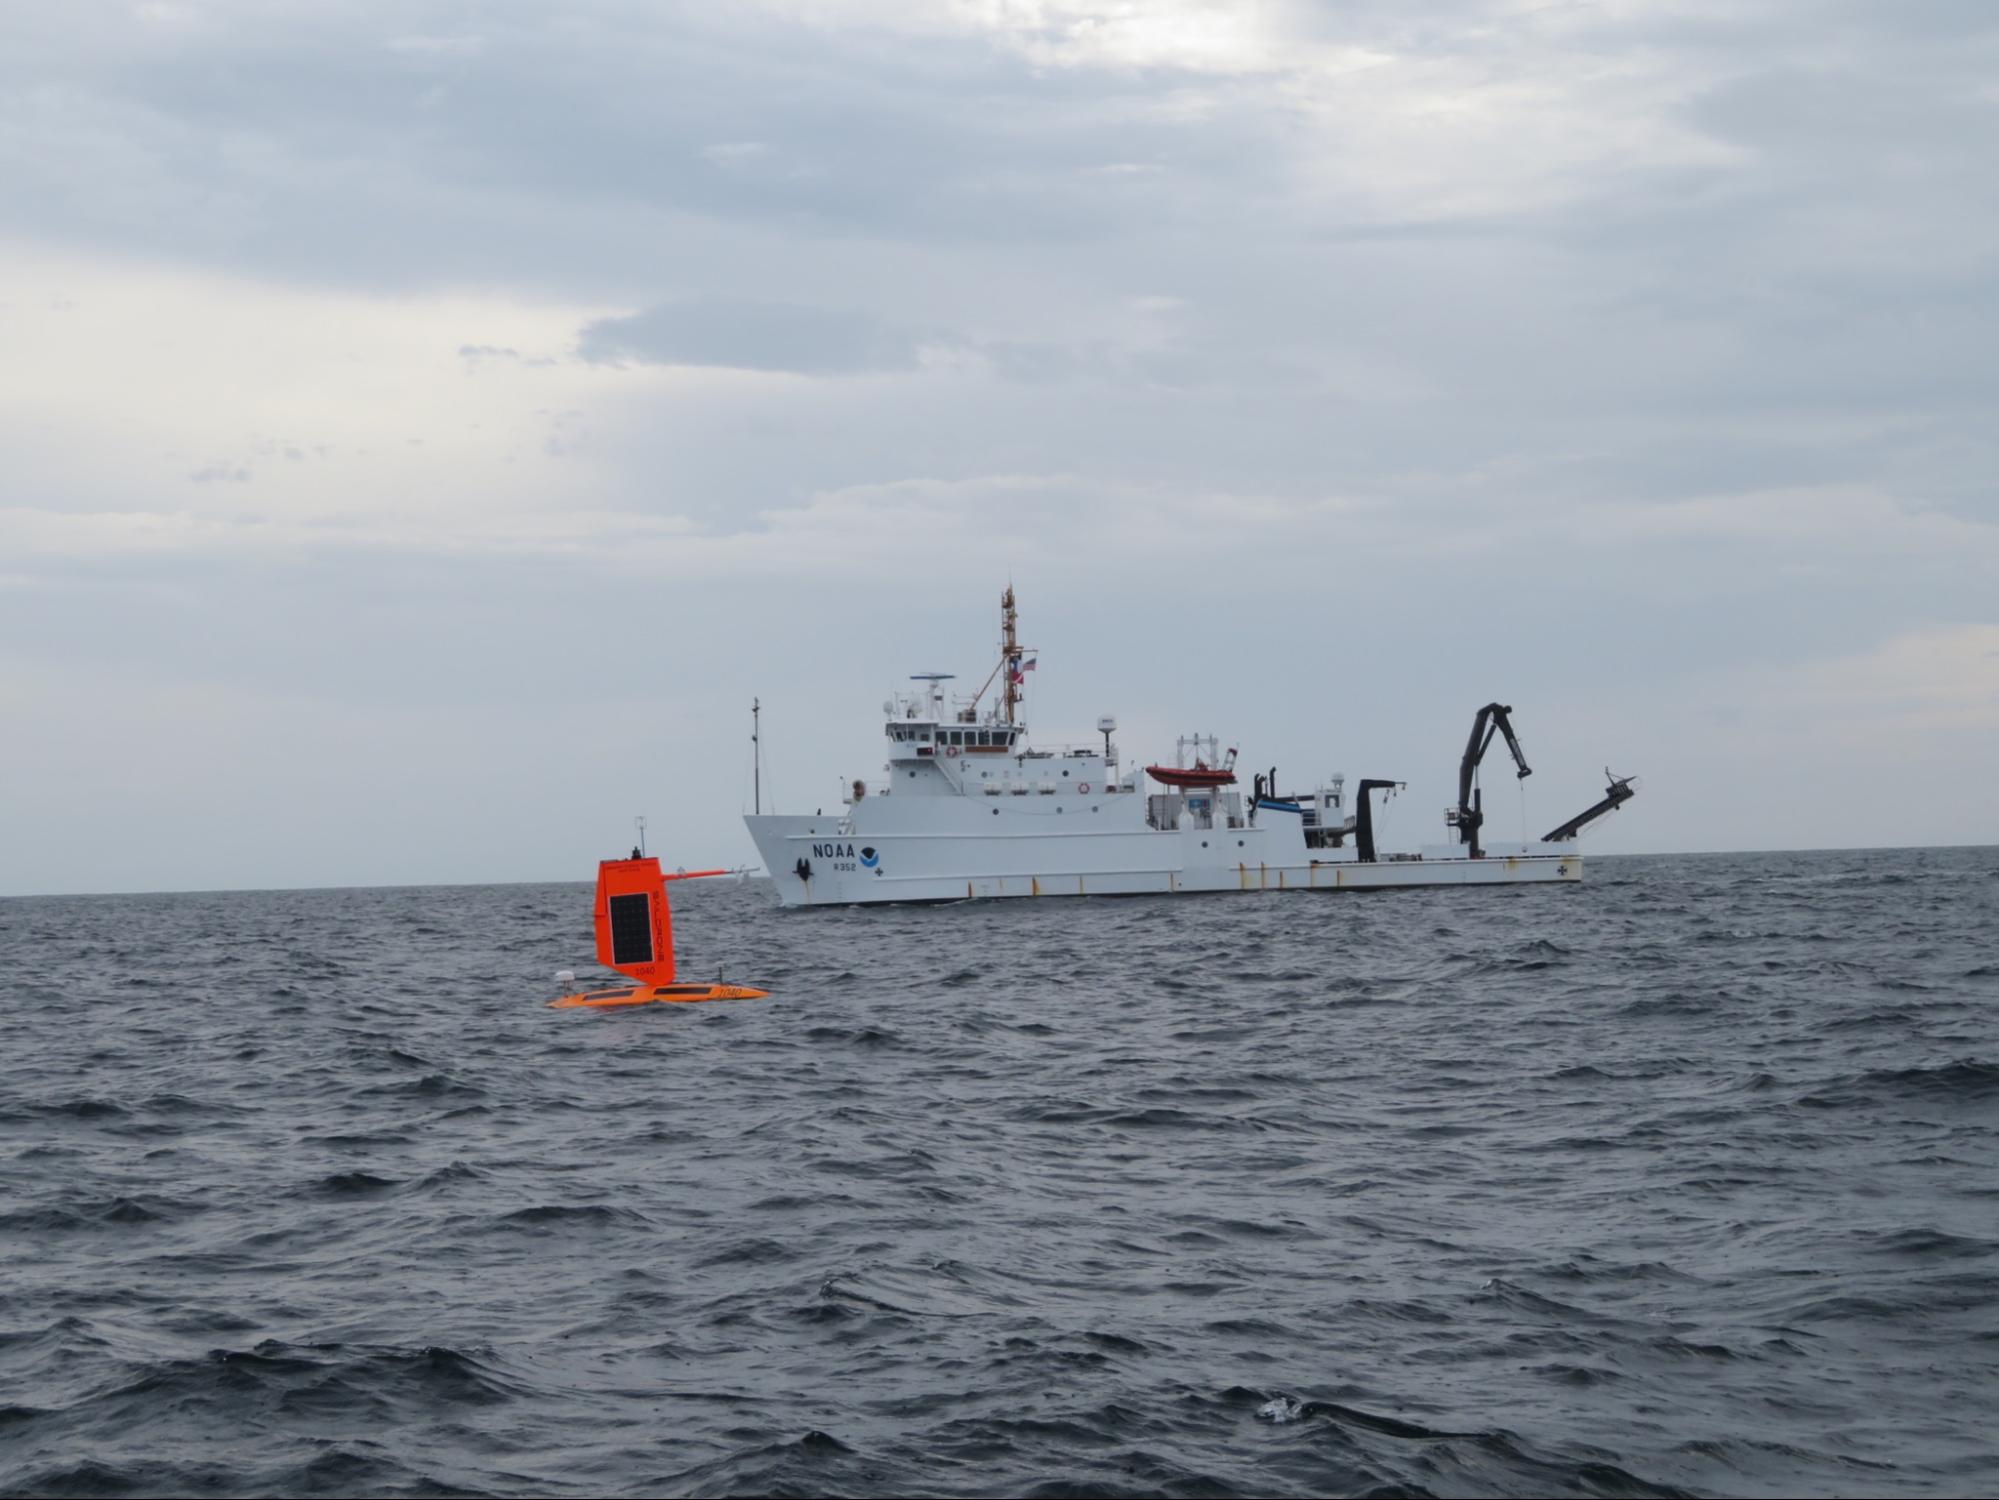 NOAA Ship Nancy Foster with Saildrone 1040 in the foreground